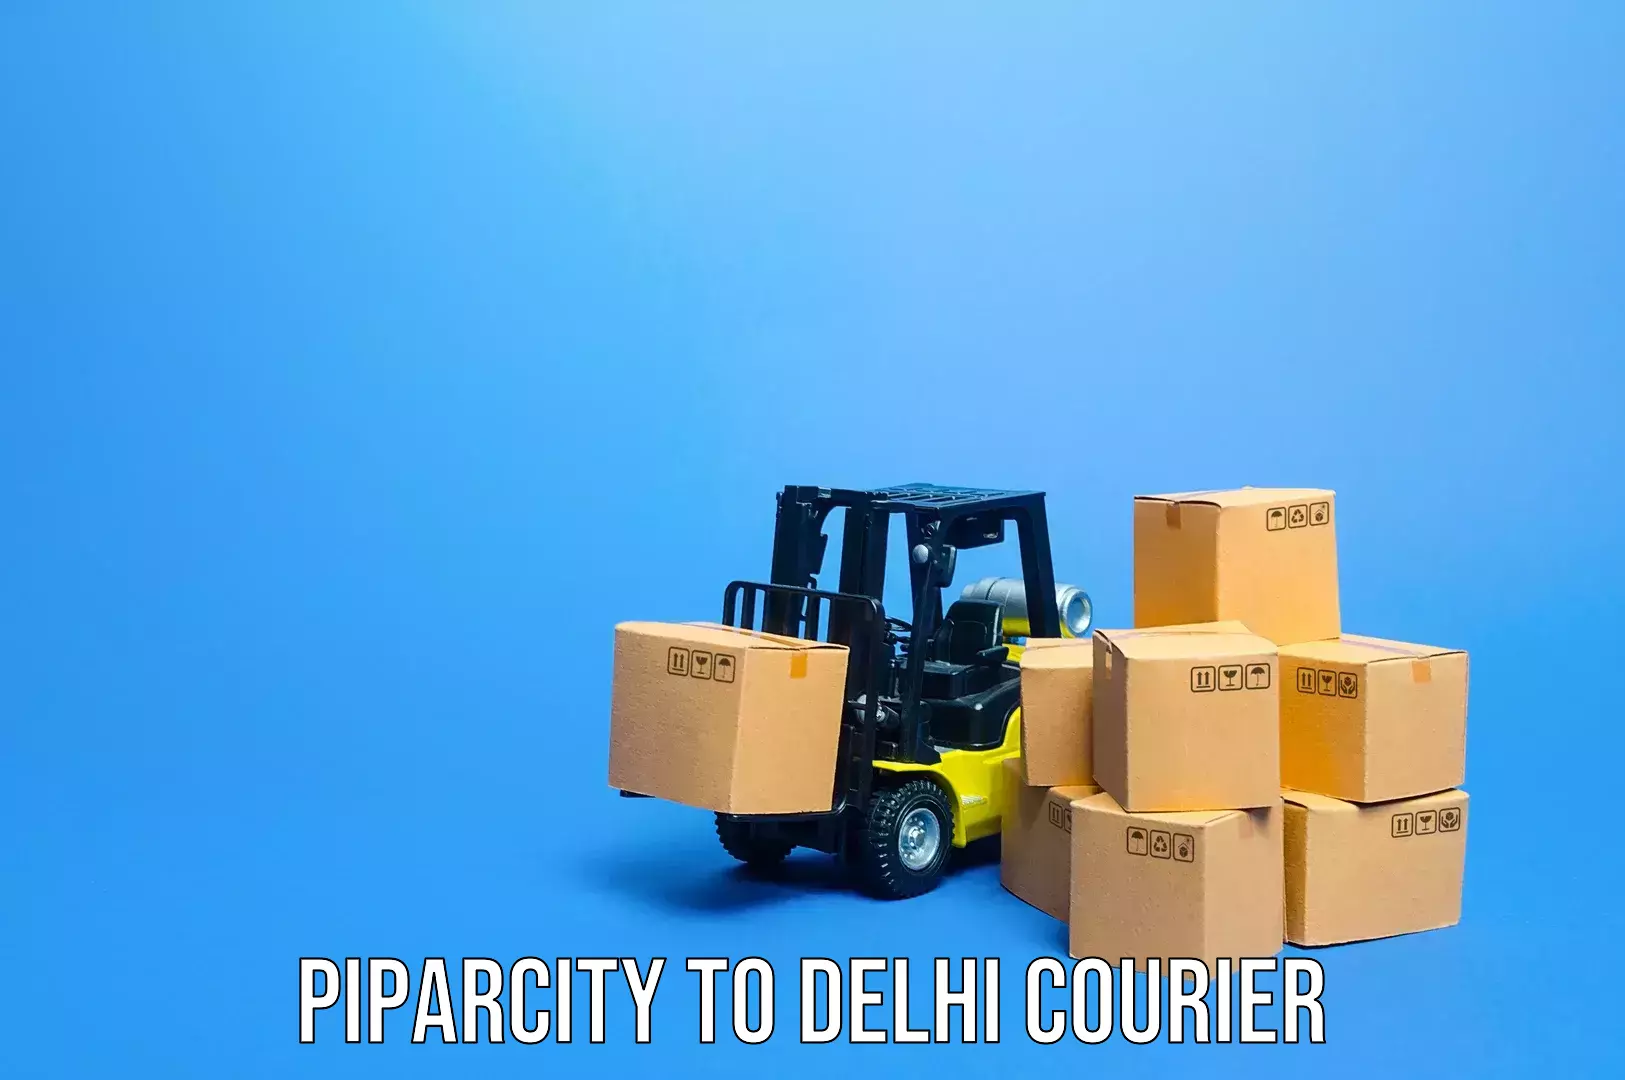 Luggage shipment processing Piparcity to Indraprastha